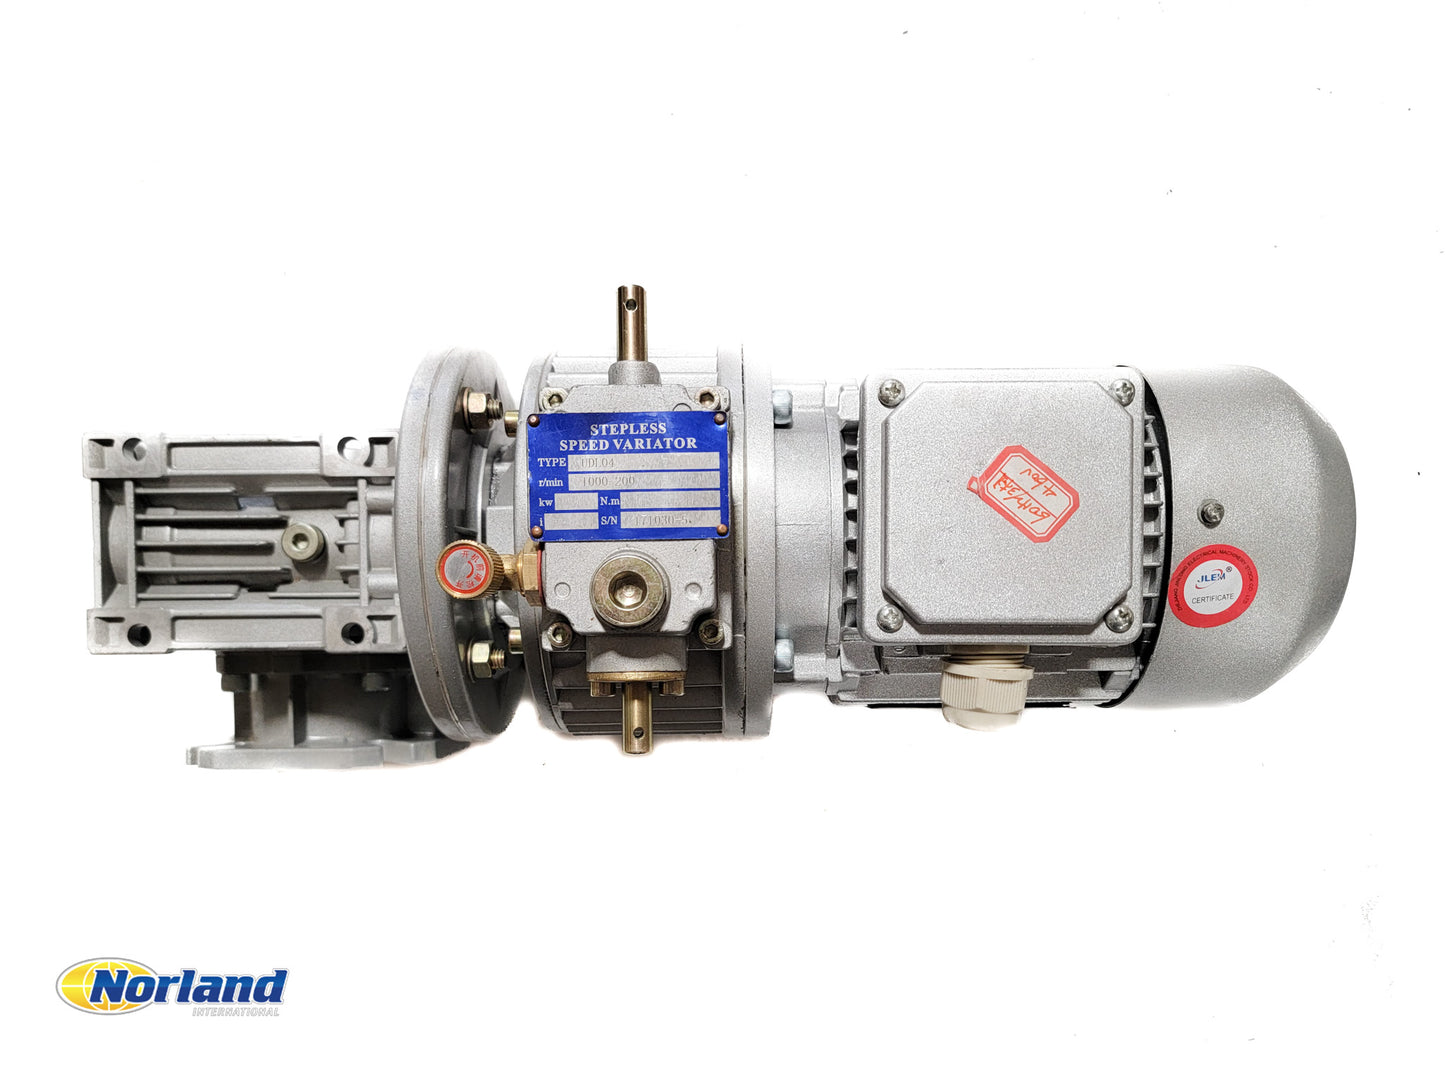 460V, 3 Phase, 60 Hz Variable Speed Conveyor Motor & Gearbox